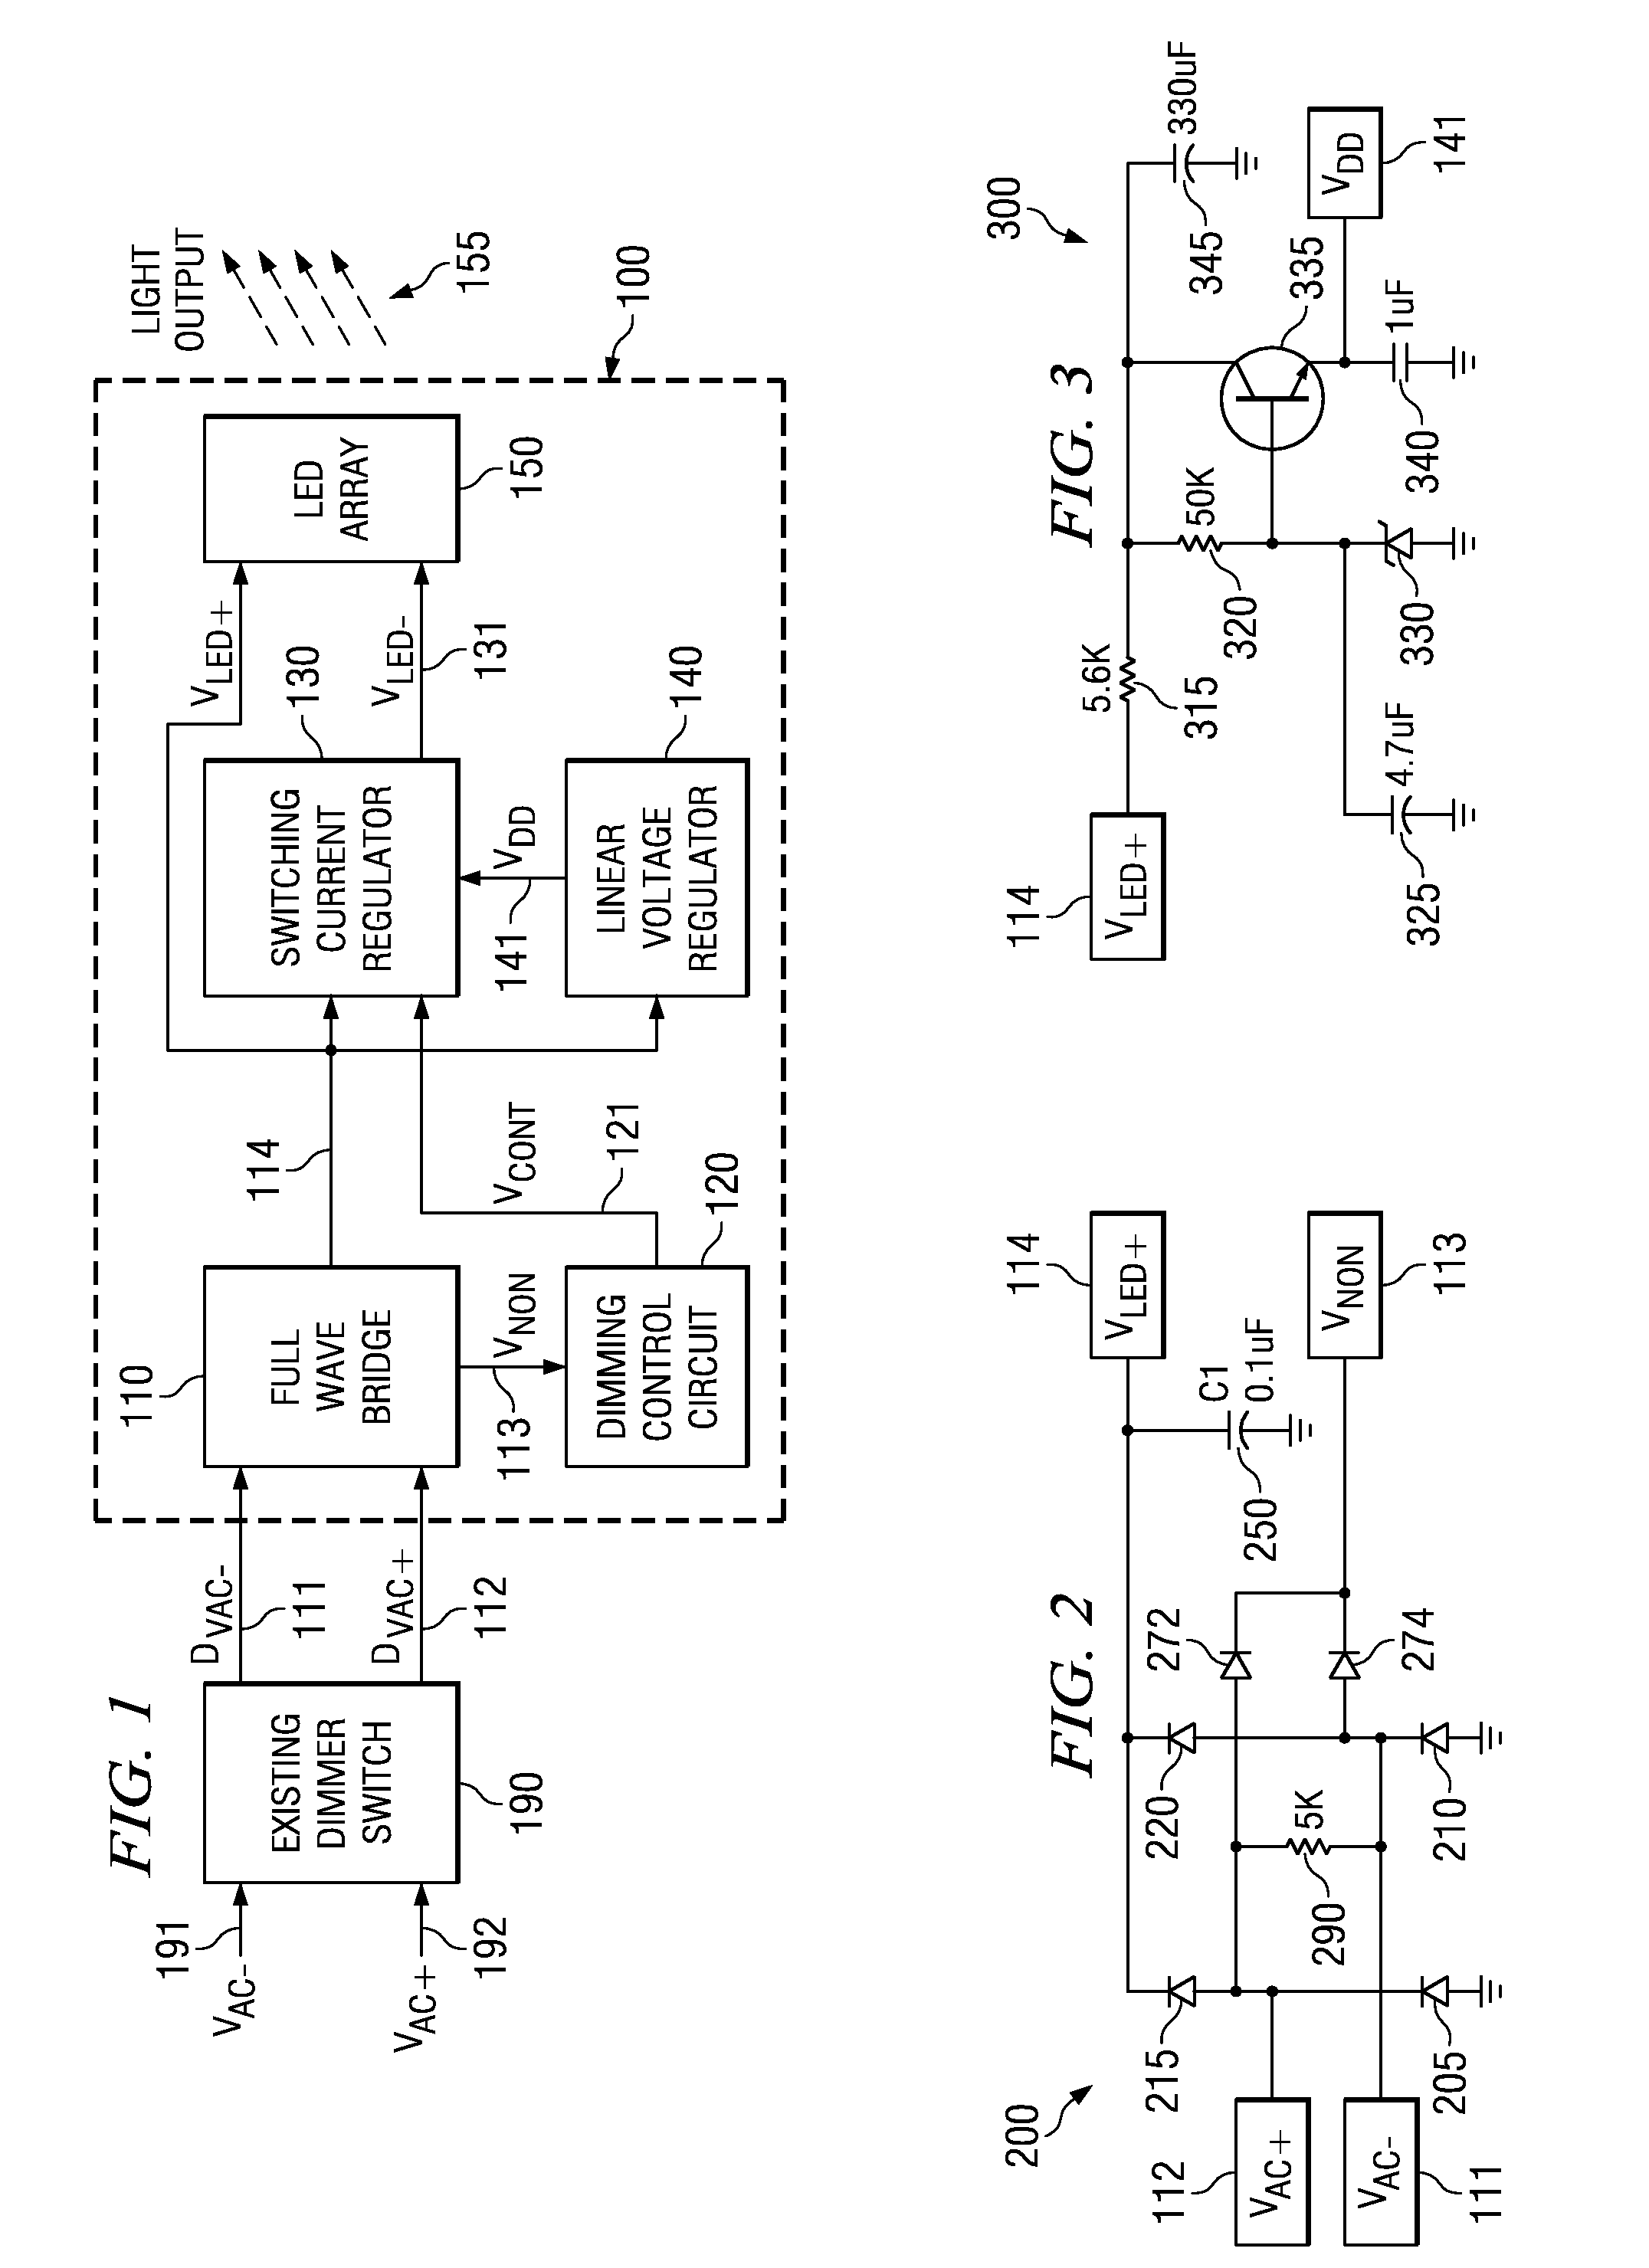 Systems and methods for LED based lighting